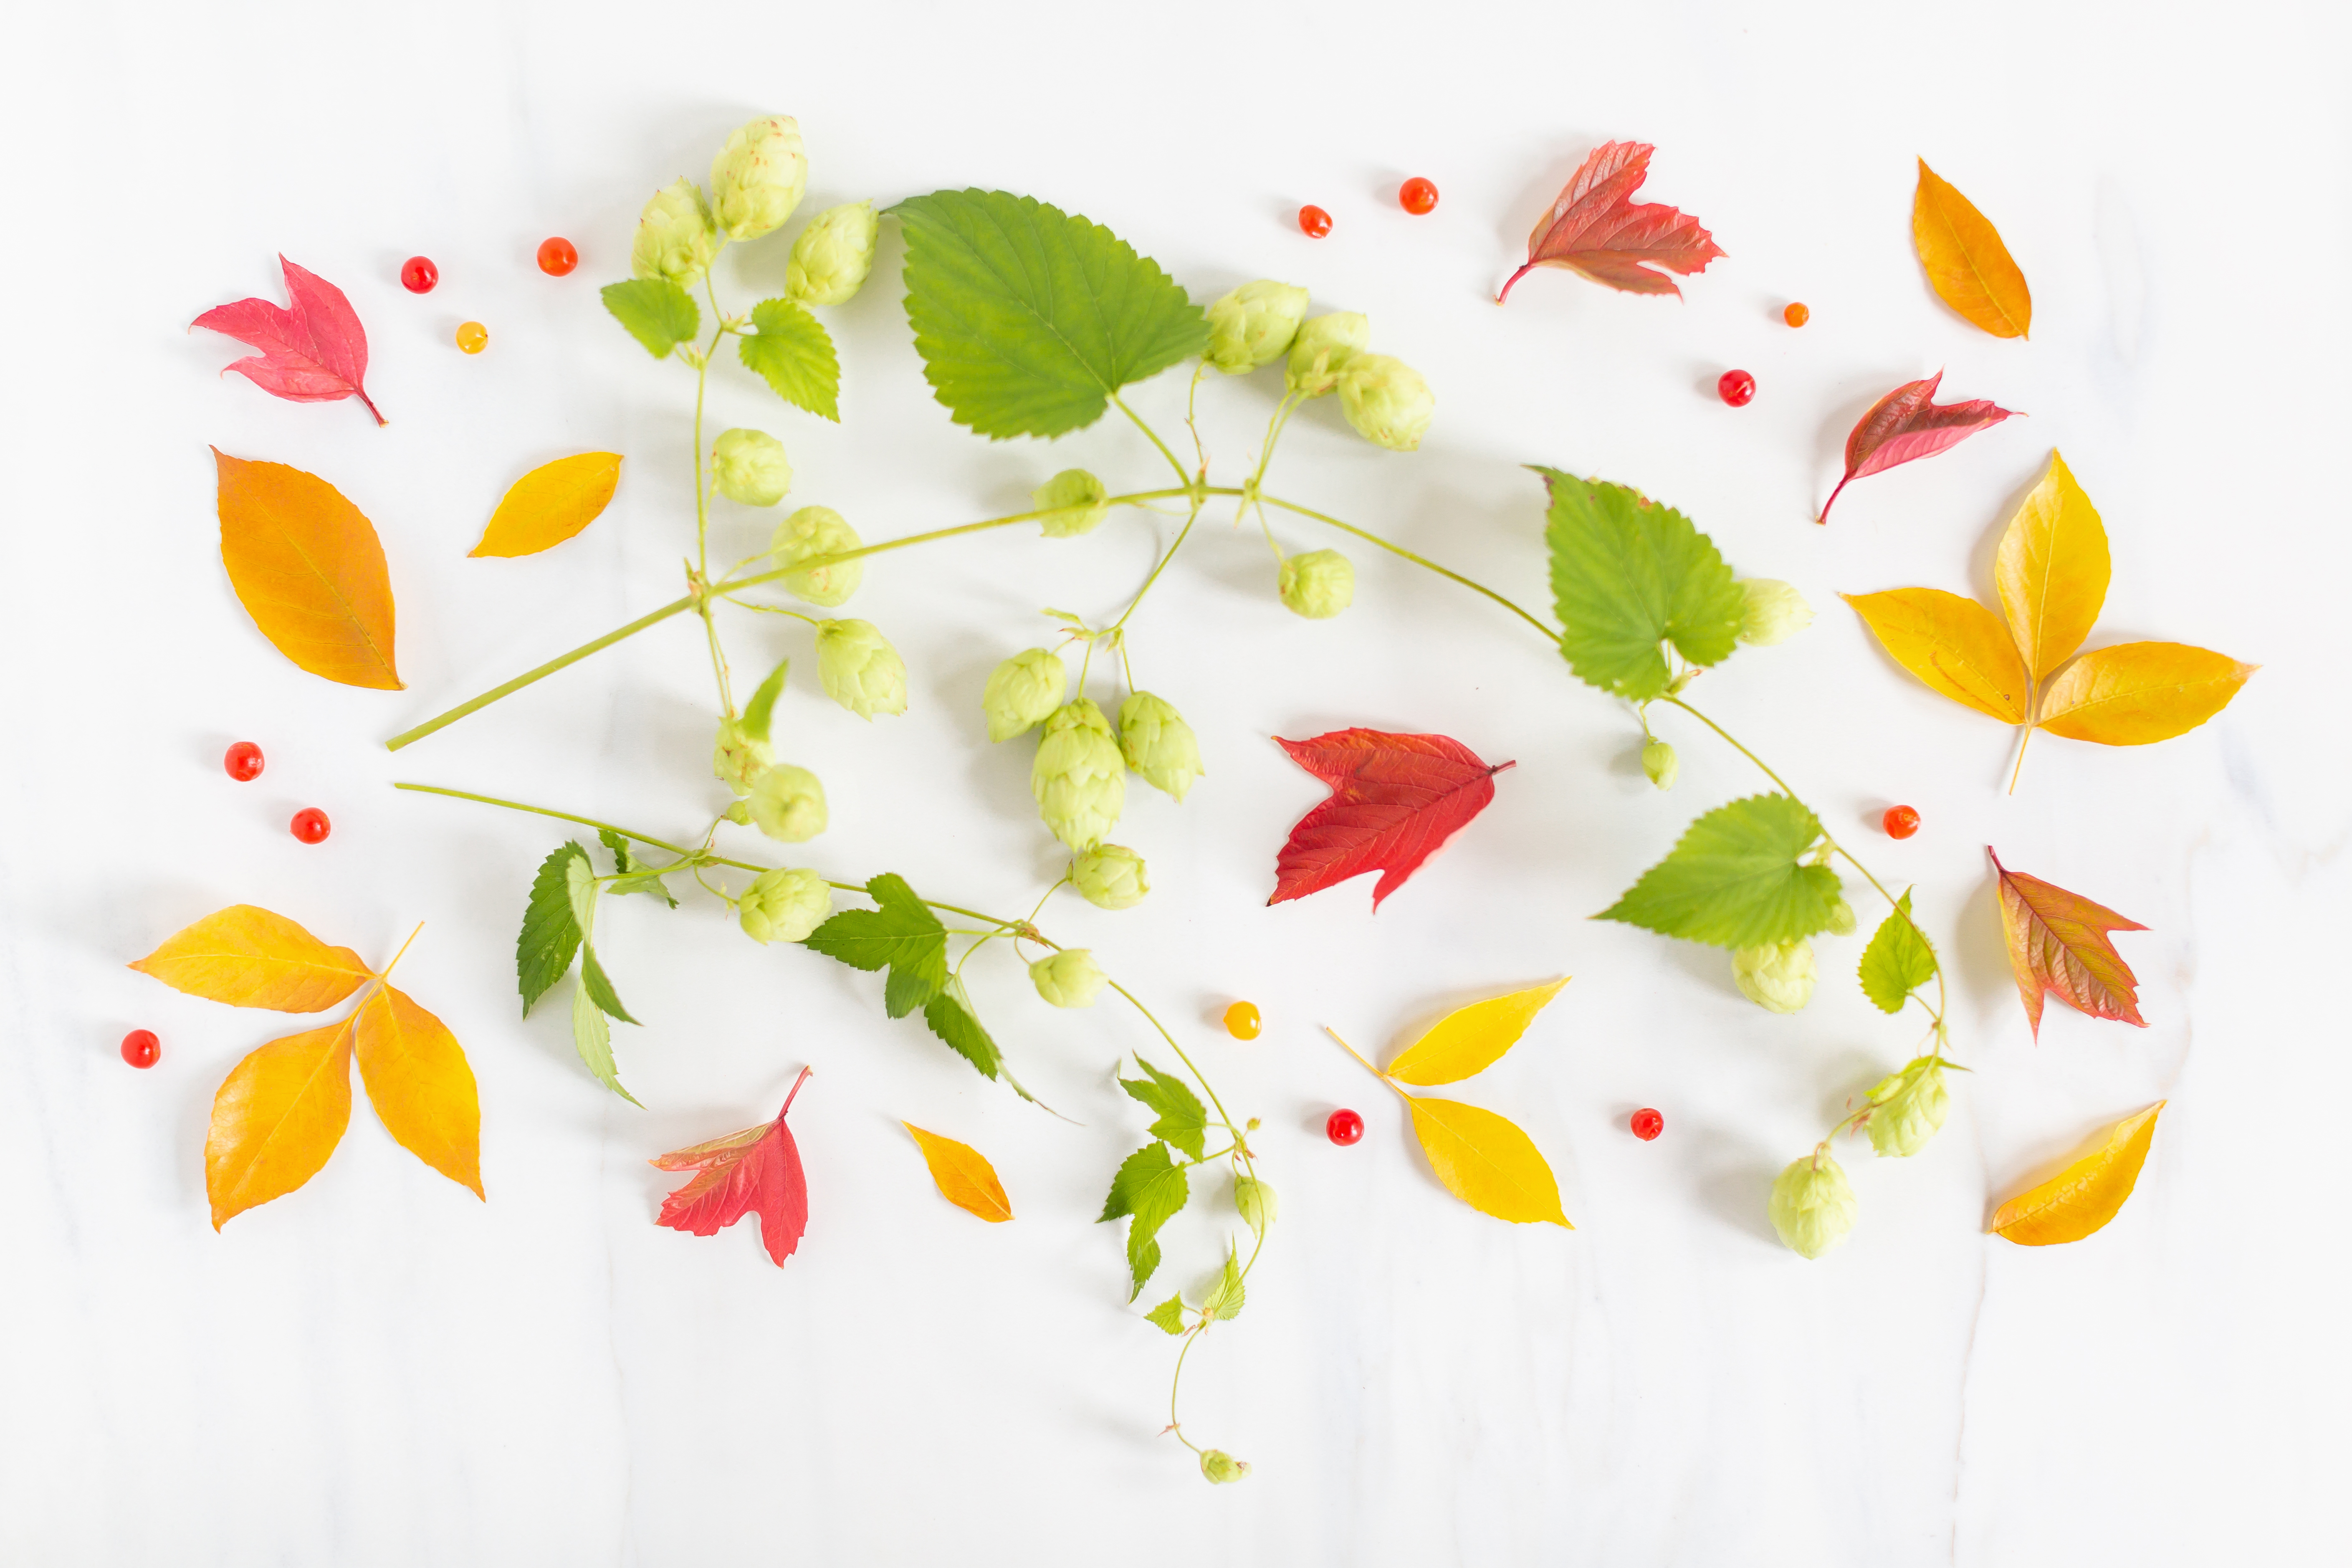 Digital Blooms October 2018 | Free Desktop Wallpapers for Fall with Hops and an array of foraged autumn leaves and berries | Fall Wreath Wallpaper | Pantone Fall / Winter 2018 Free Tech Wallpapers | Design 1 // JustineCelina.com x Rebecca Dawn Design